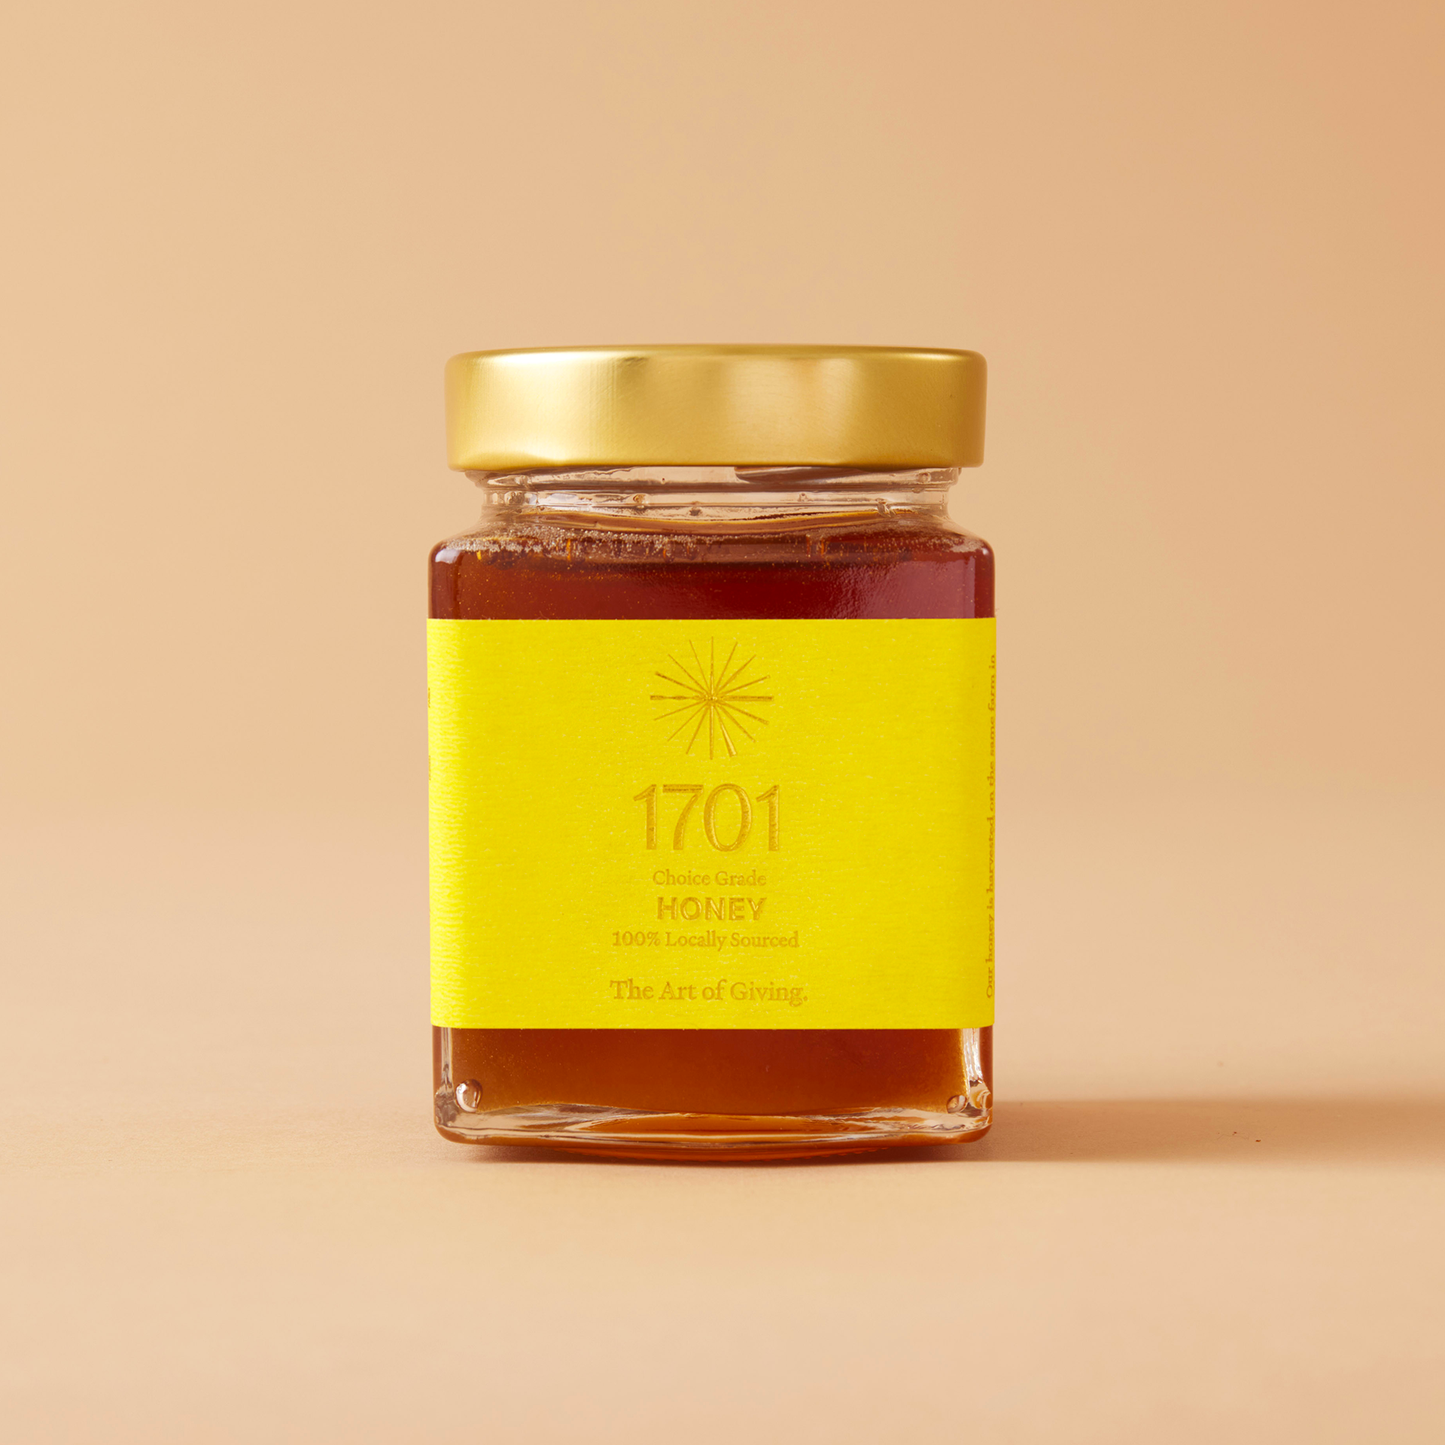 100% Locally Sourced Pure Honey